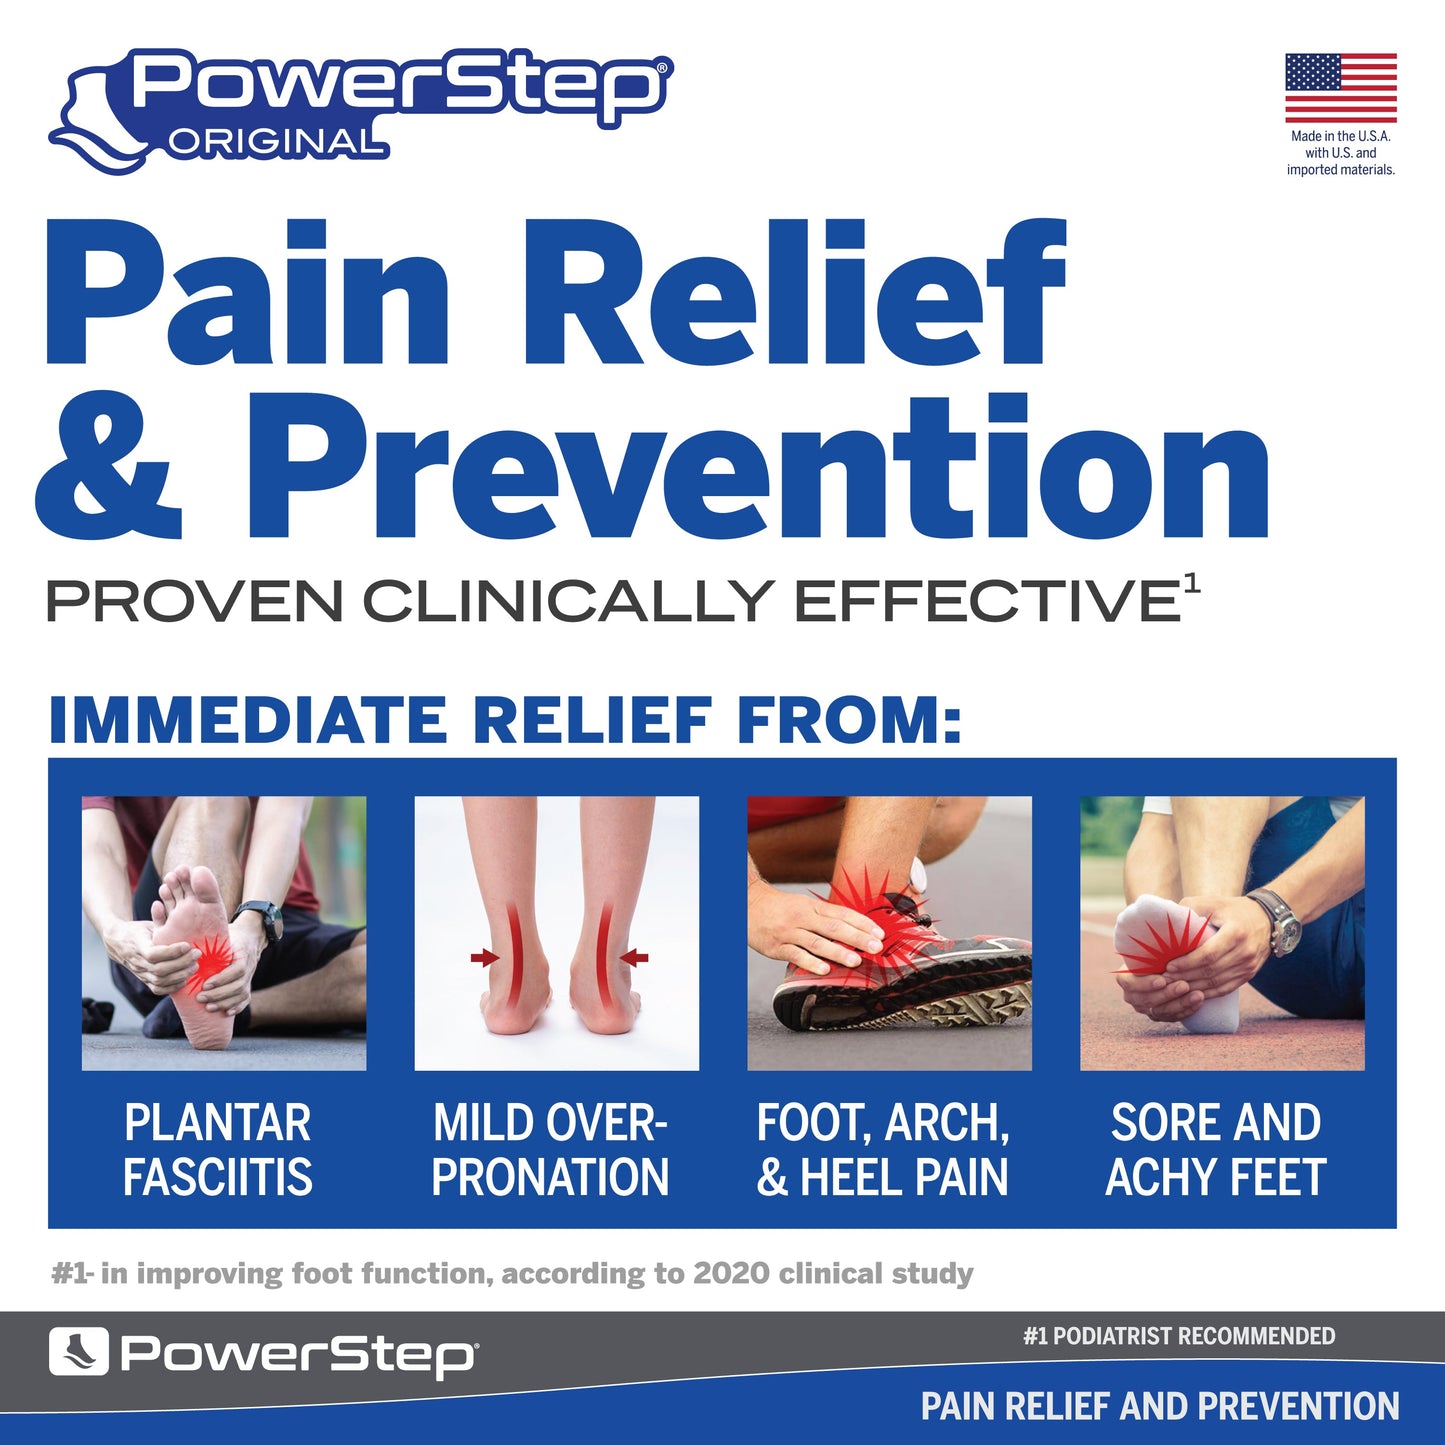 PowerStep Original Orthotic Shoe Insoles, Made in the USA with US and imported materials, pain relief and prevention, proven clinically effective for immediate relief from plantar fasciitis, mild overpronation, foot, arch, and heel pain, sore, achy feet, number one in improving foot function according to 2020 clinical study, number one podiatrist recommended shoe orthotic for arch support